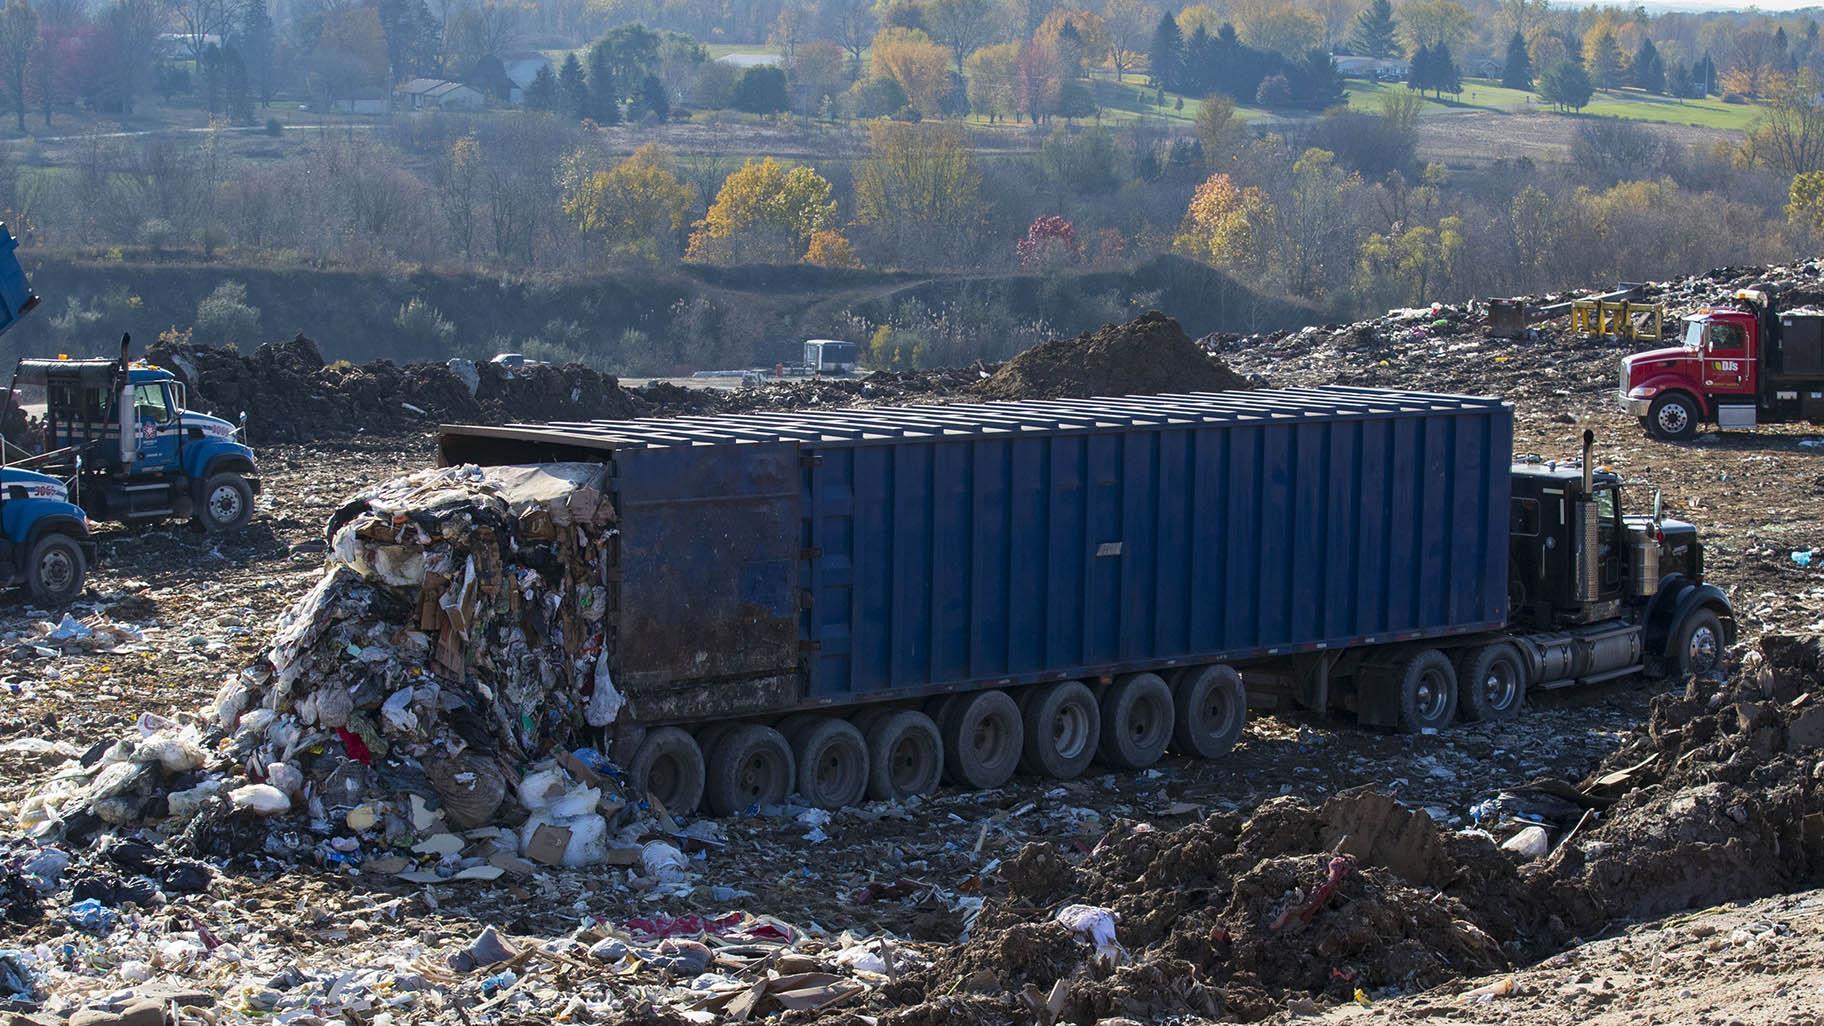 A truck drops off a load of garbage at the South Kent Landfill in Byron Township, Mich., on Wednesday, Nov. 8, 2017. (Mike Clark / The Grand Rapids Press via AP, File)